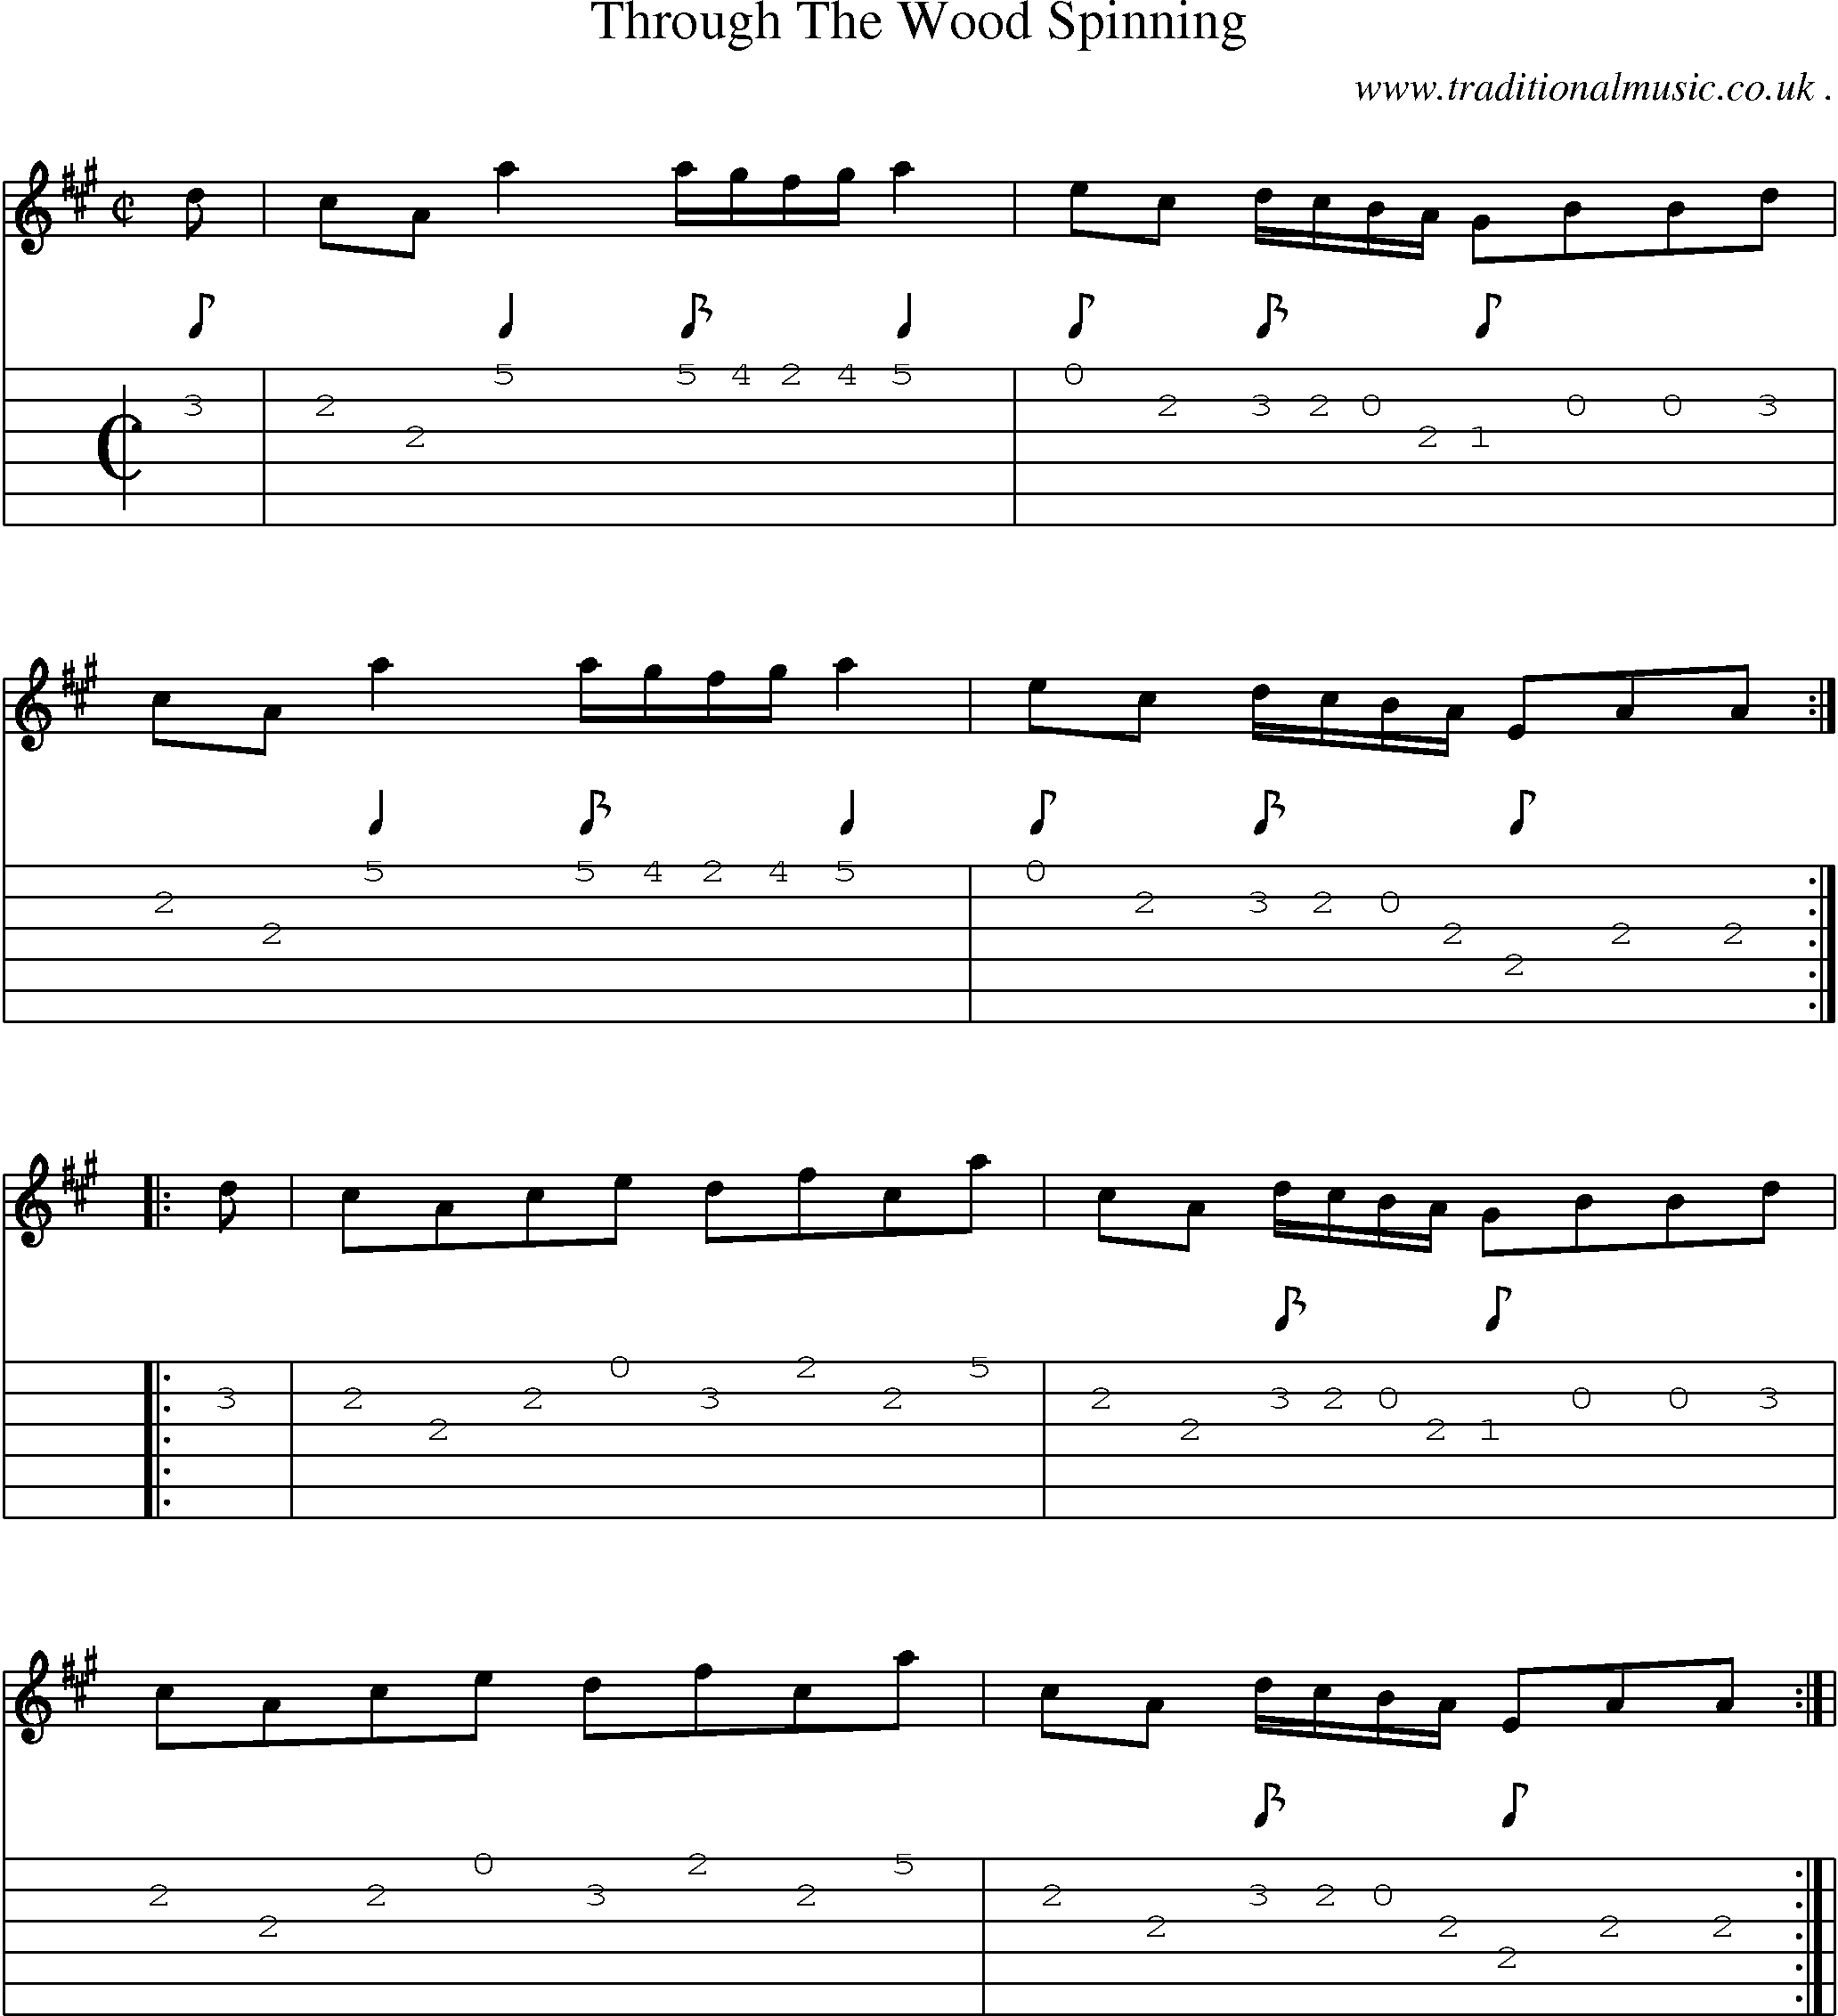 Sheet-Music and Guitar Tabs for Through The Wood Spinning